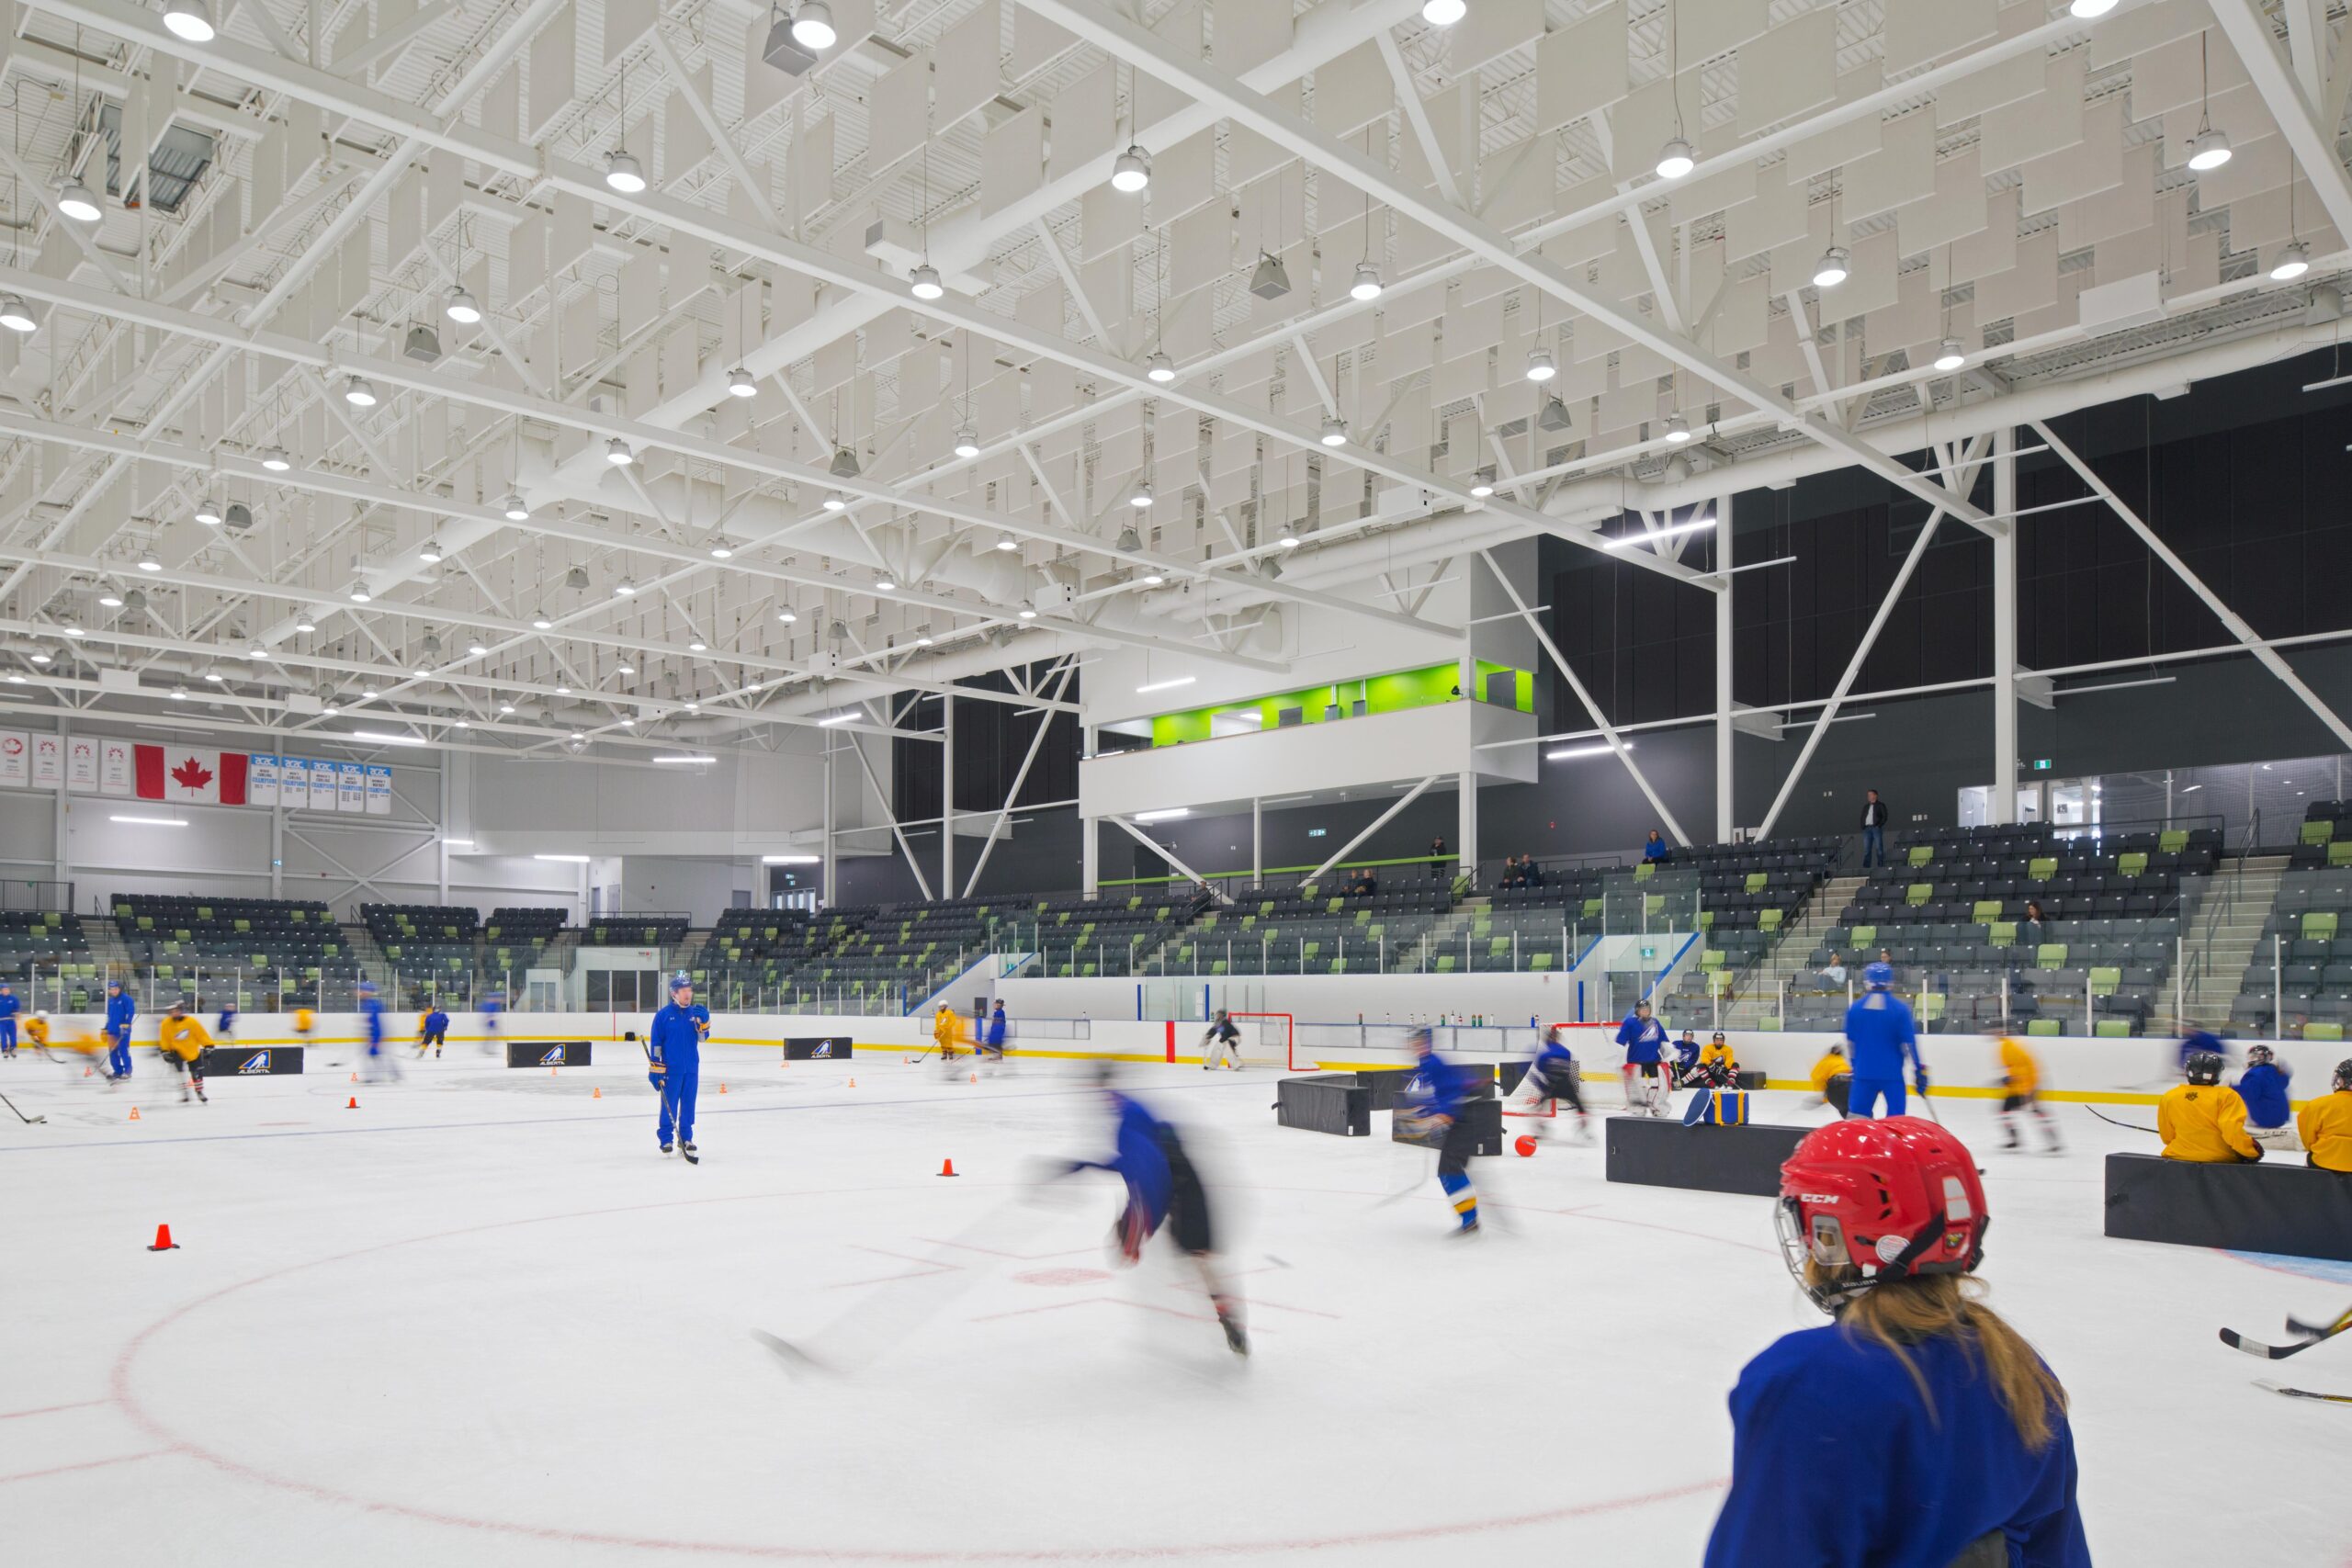 Hockey teams are seen skating on the ice-rink at Gary W. Harris Canada Centre.